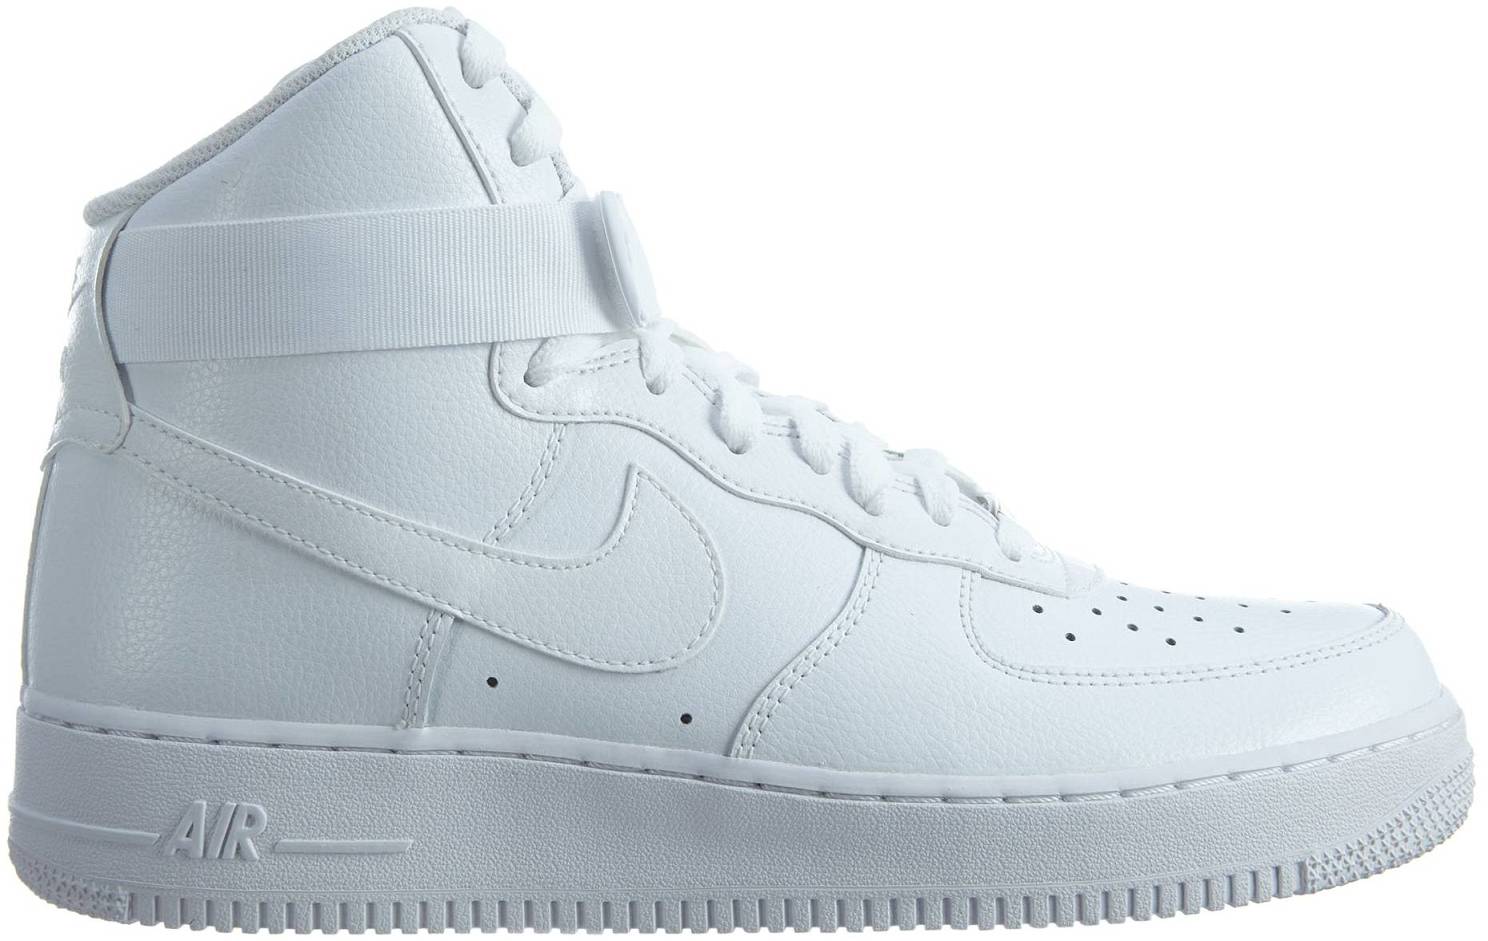 Nike Air Force 1 High – Shoes Reviews & Reasons To Buy